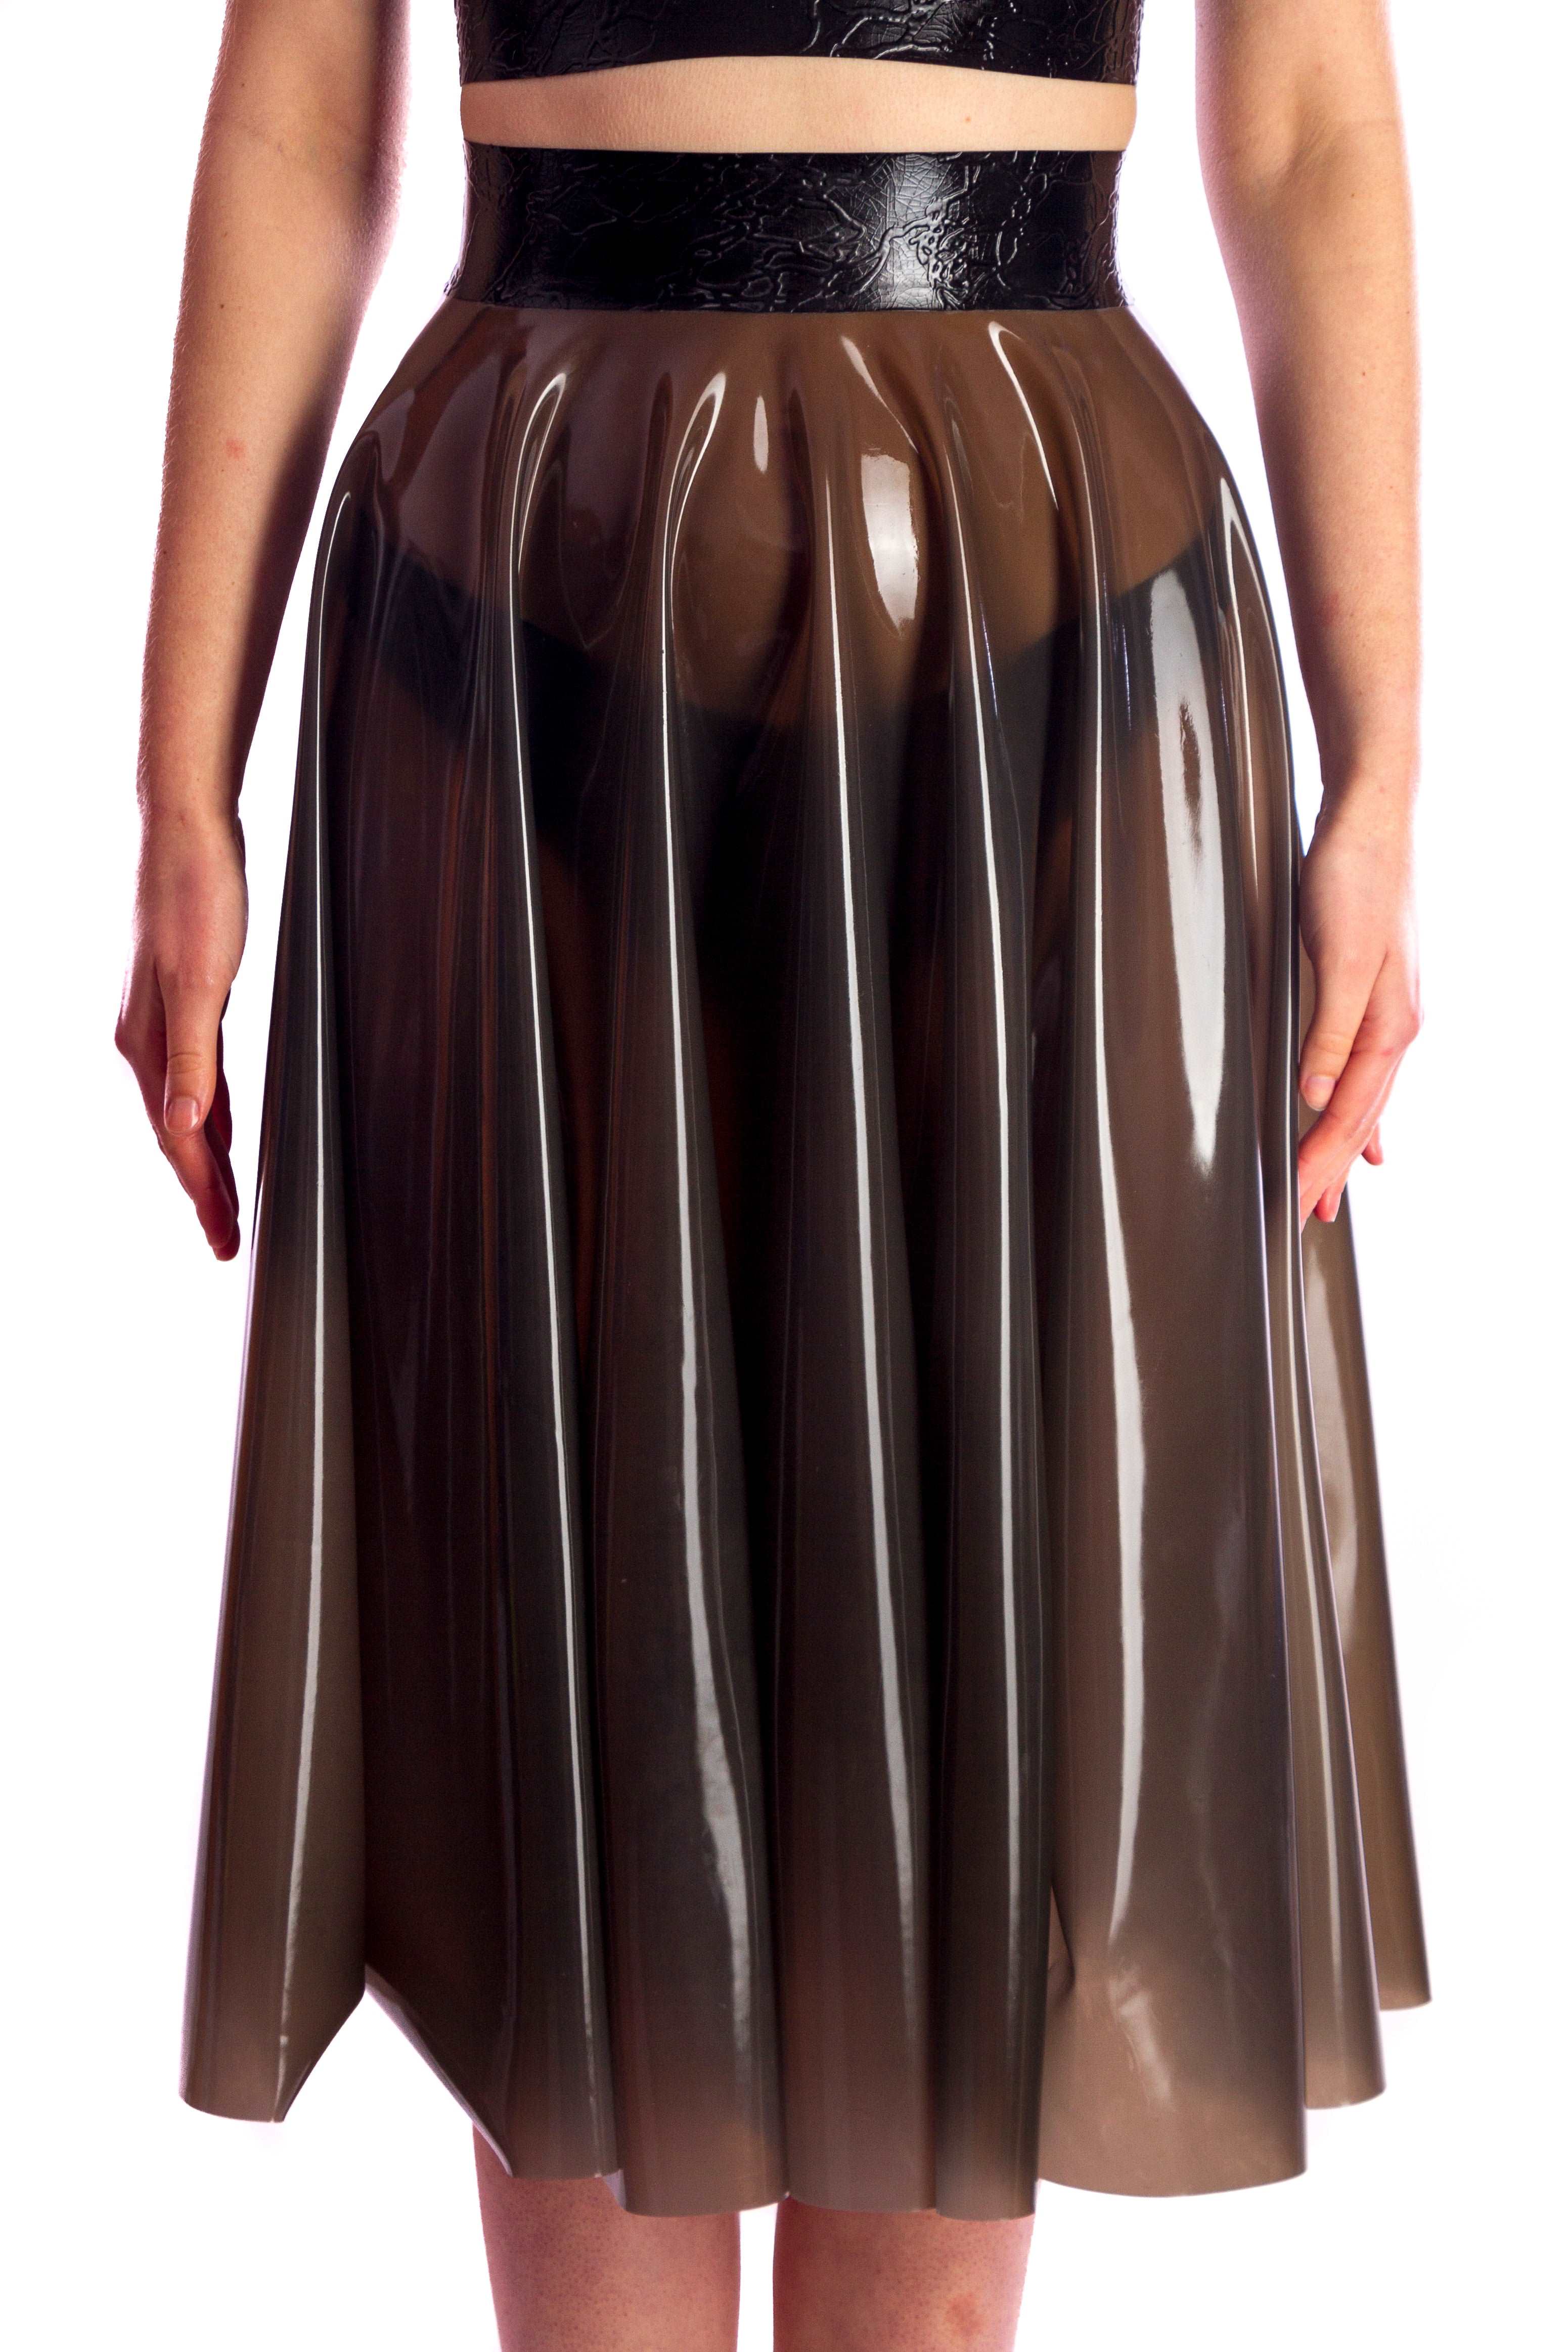 Latex Skirts – Latex Couture